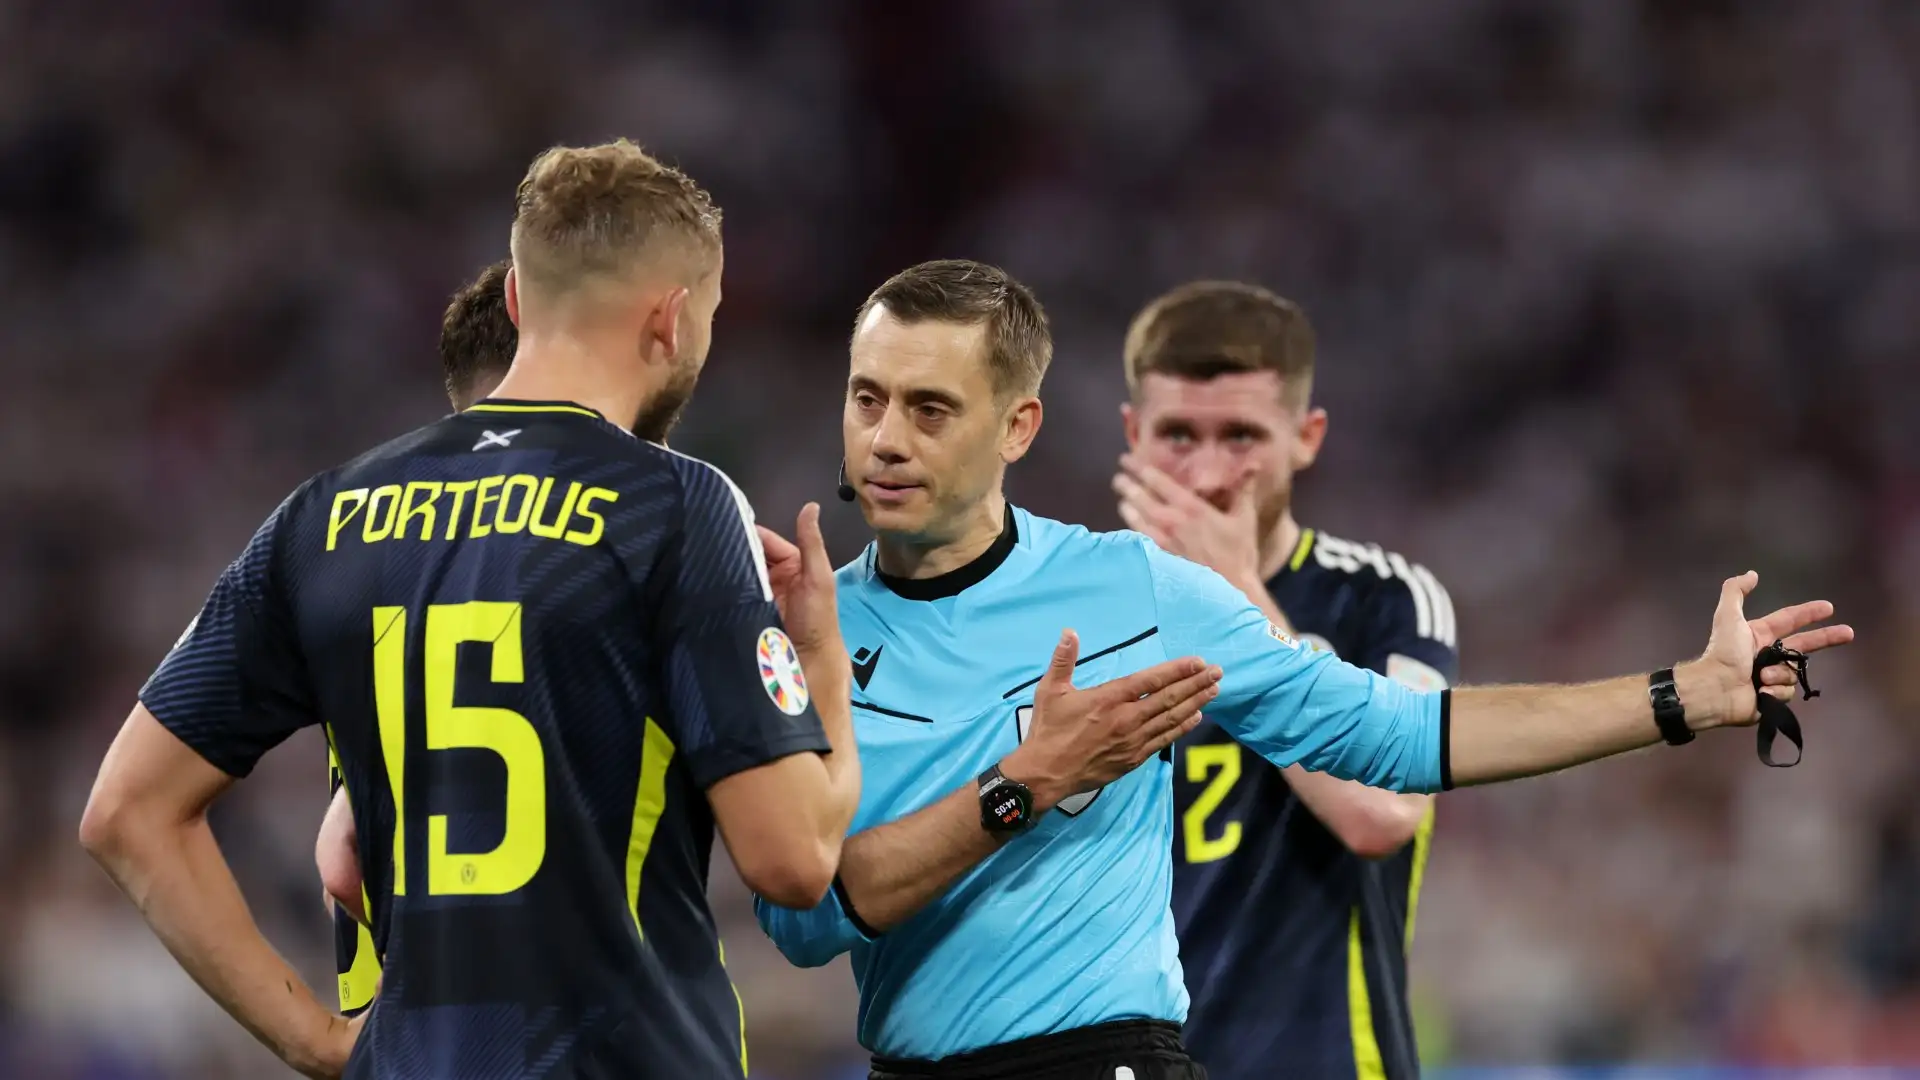 Ryan Porteous' misery compounded! Scotland defender banned for both of Tartan Army's remaining group games after brutal red card against Germany